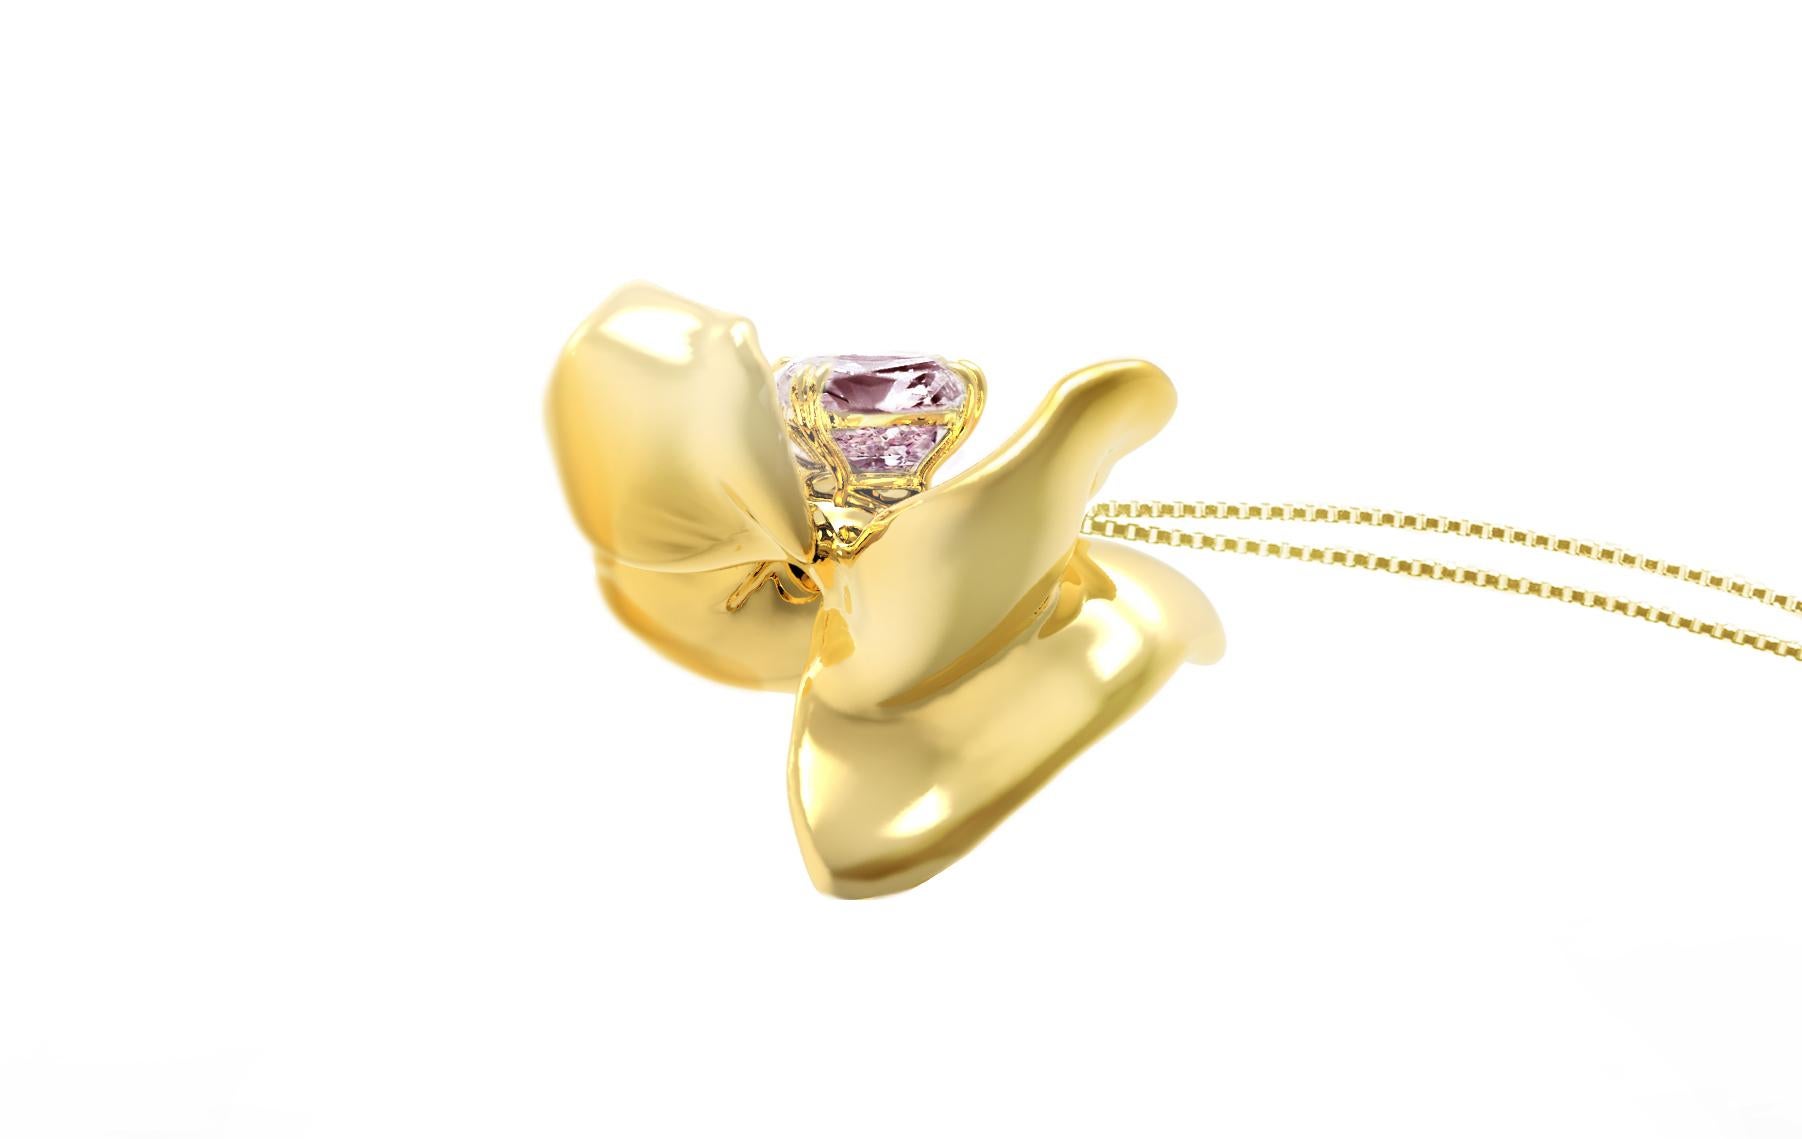 This Magnolia Flower contemporary pendant necklace is made of 18 karat yellow gold and features a berry purple cushion spinel (1.34 carats). The tender water-surface of the spinel multiplies the light, reflecting on the golden petals. The weight of